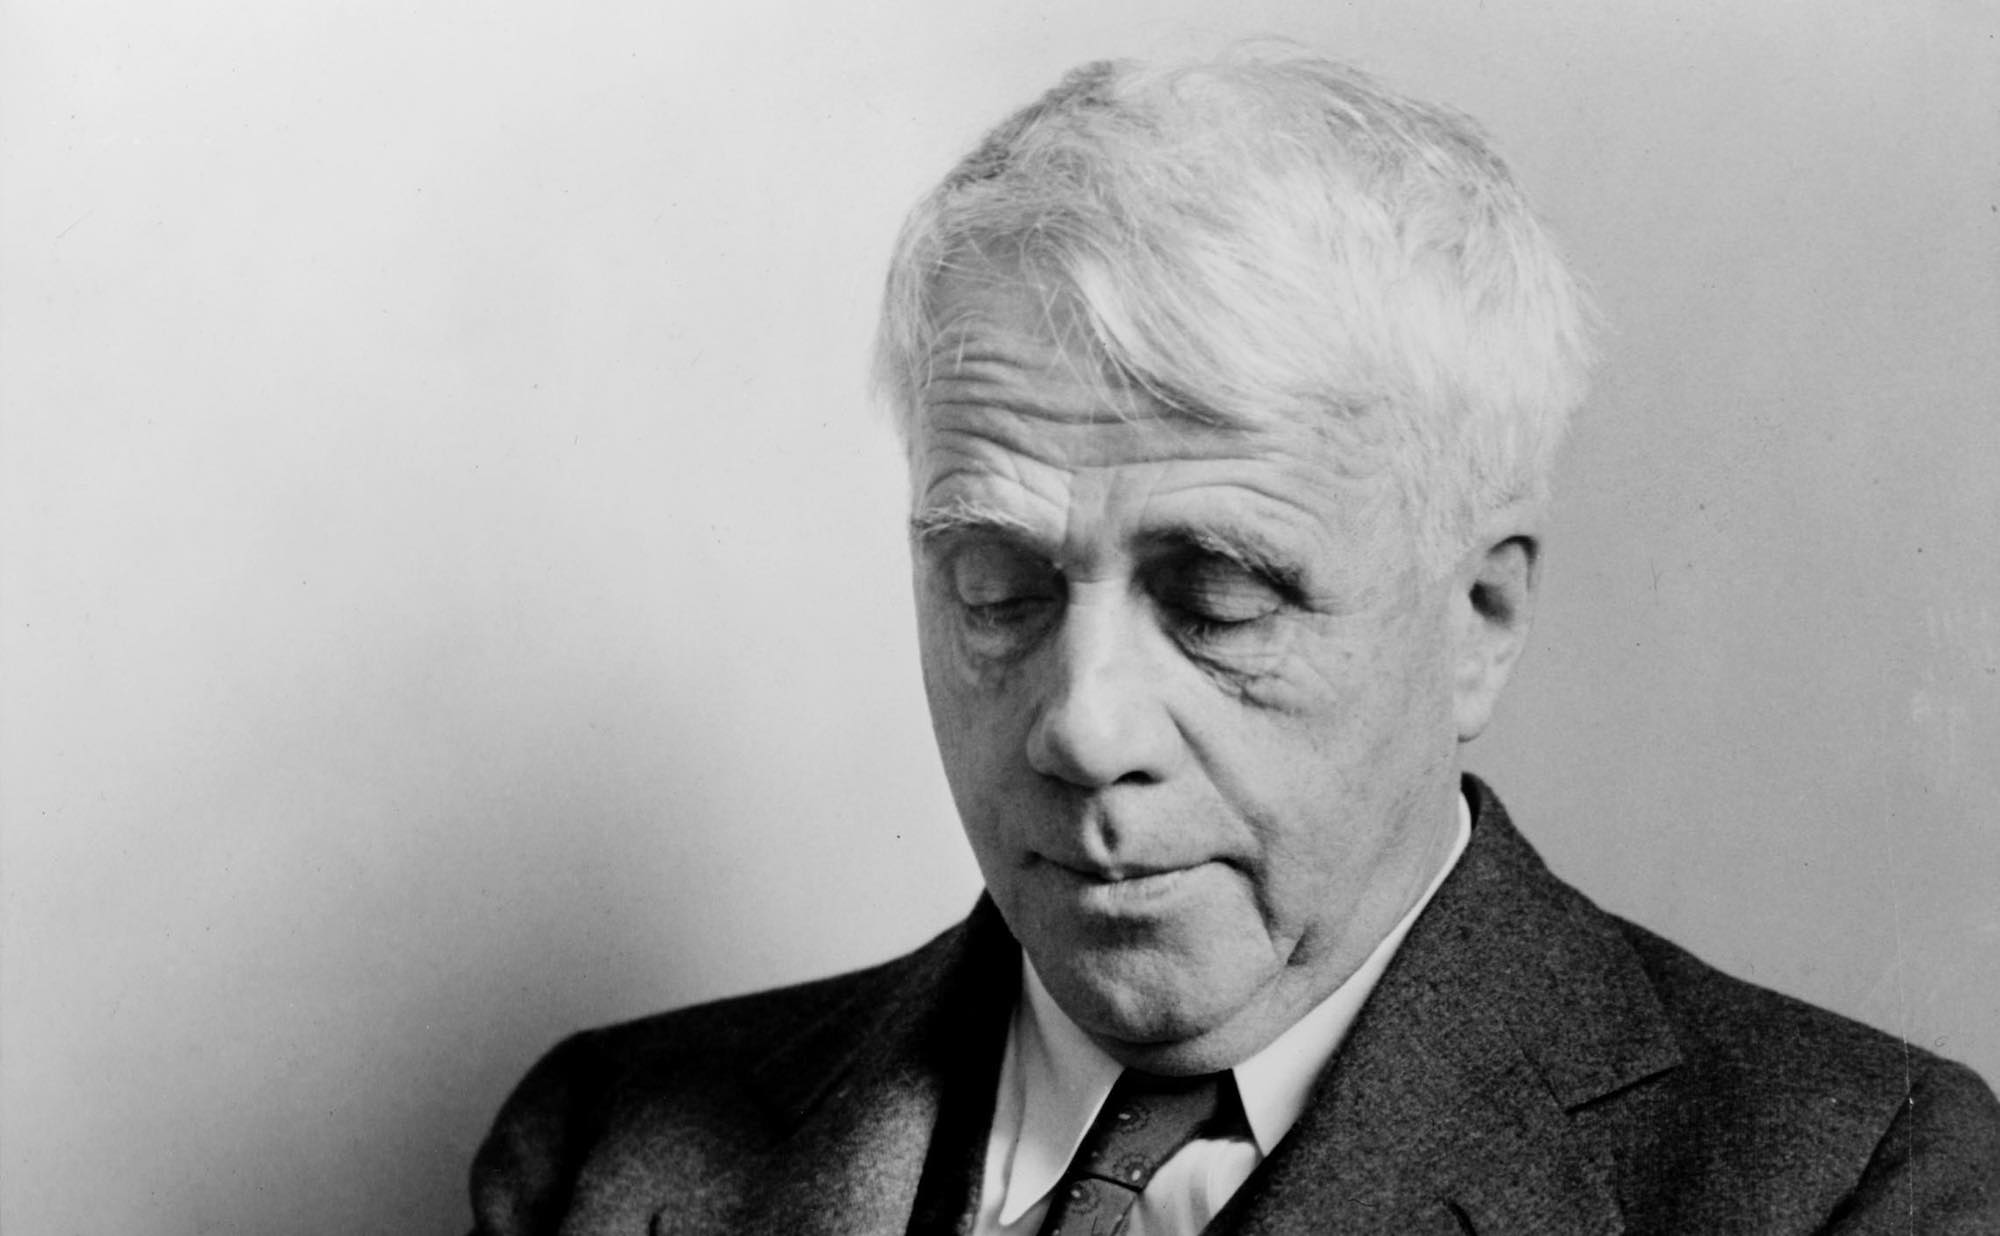 Robert Frost: A Momentary Stay. The .newrepublic.com